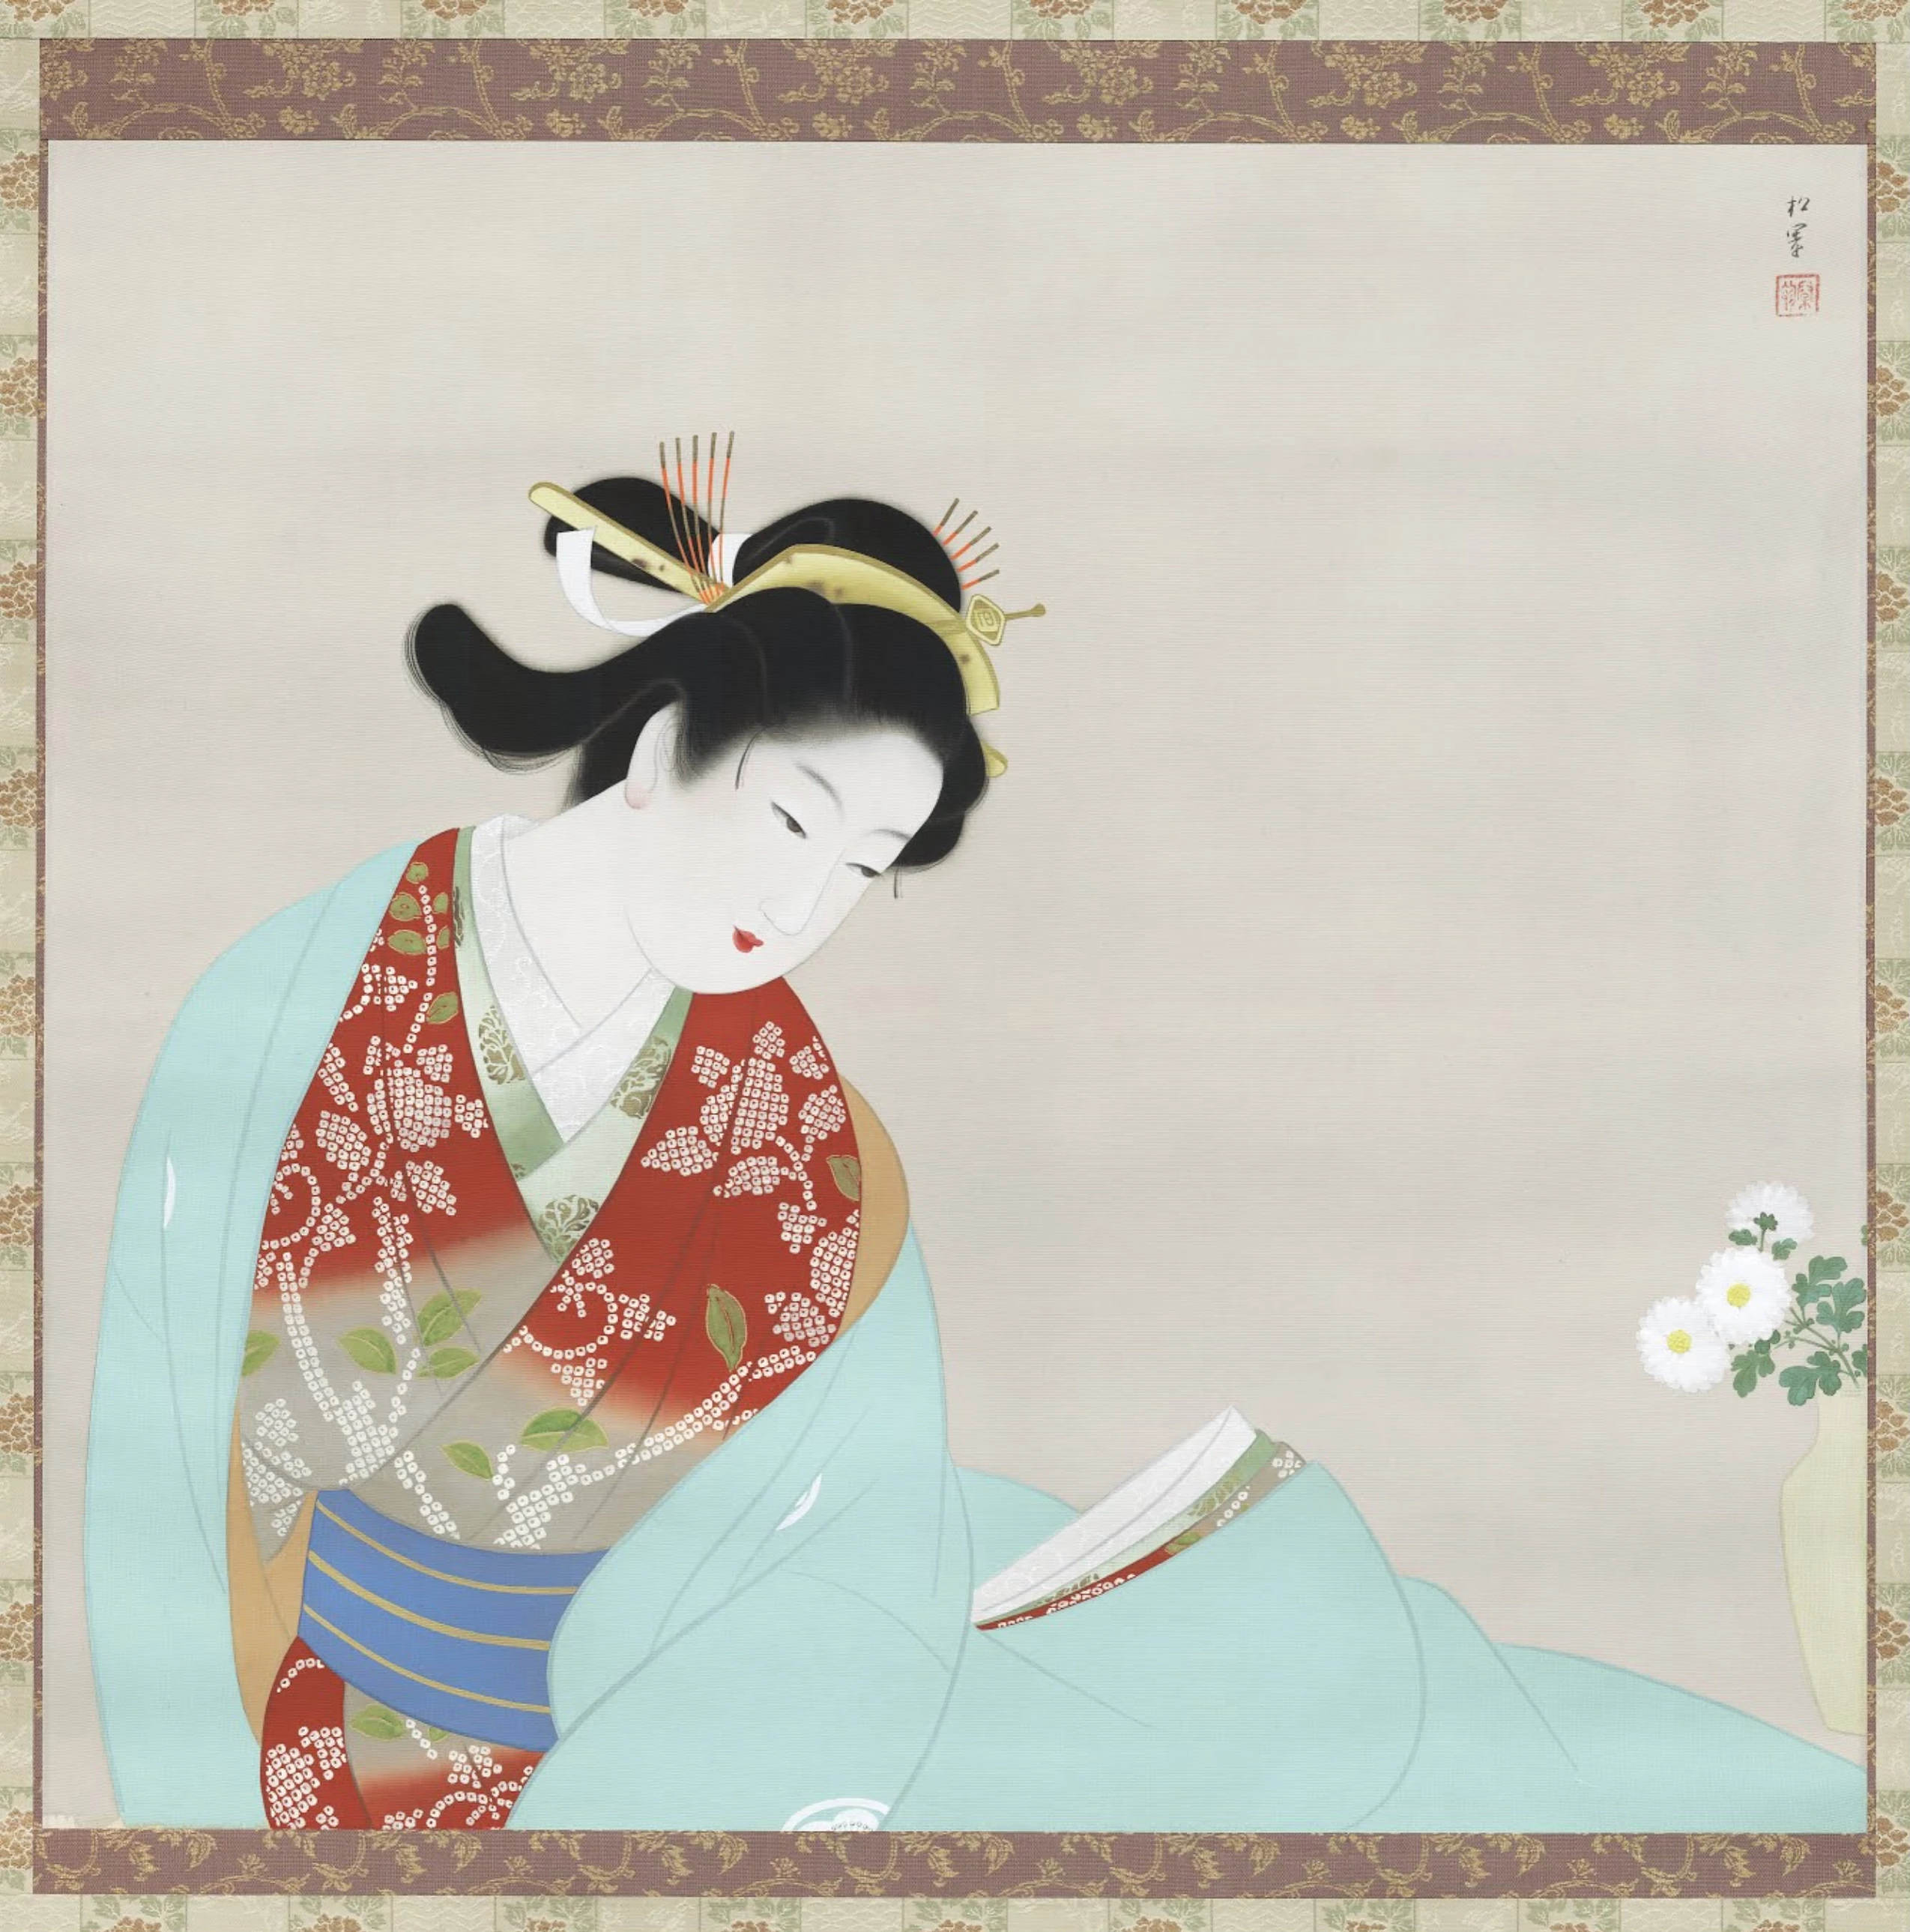 Making a Wish for a Long Life on Chrysanthemums, Uemura Shōen